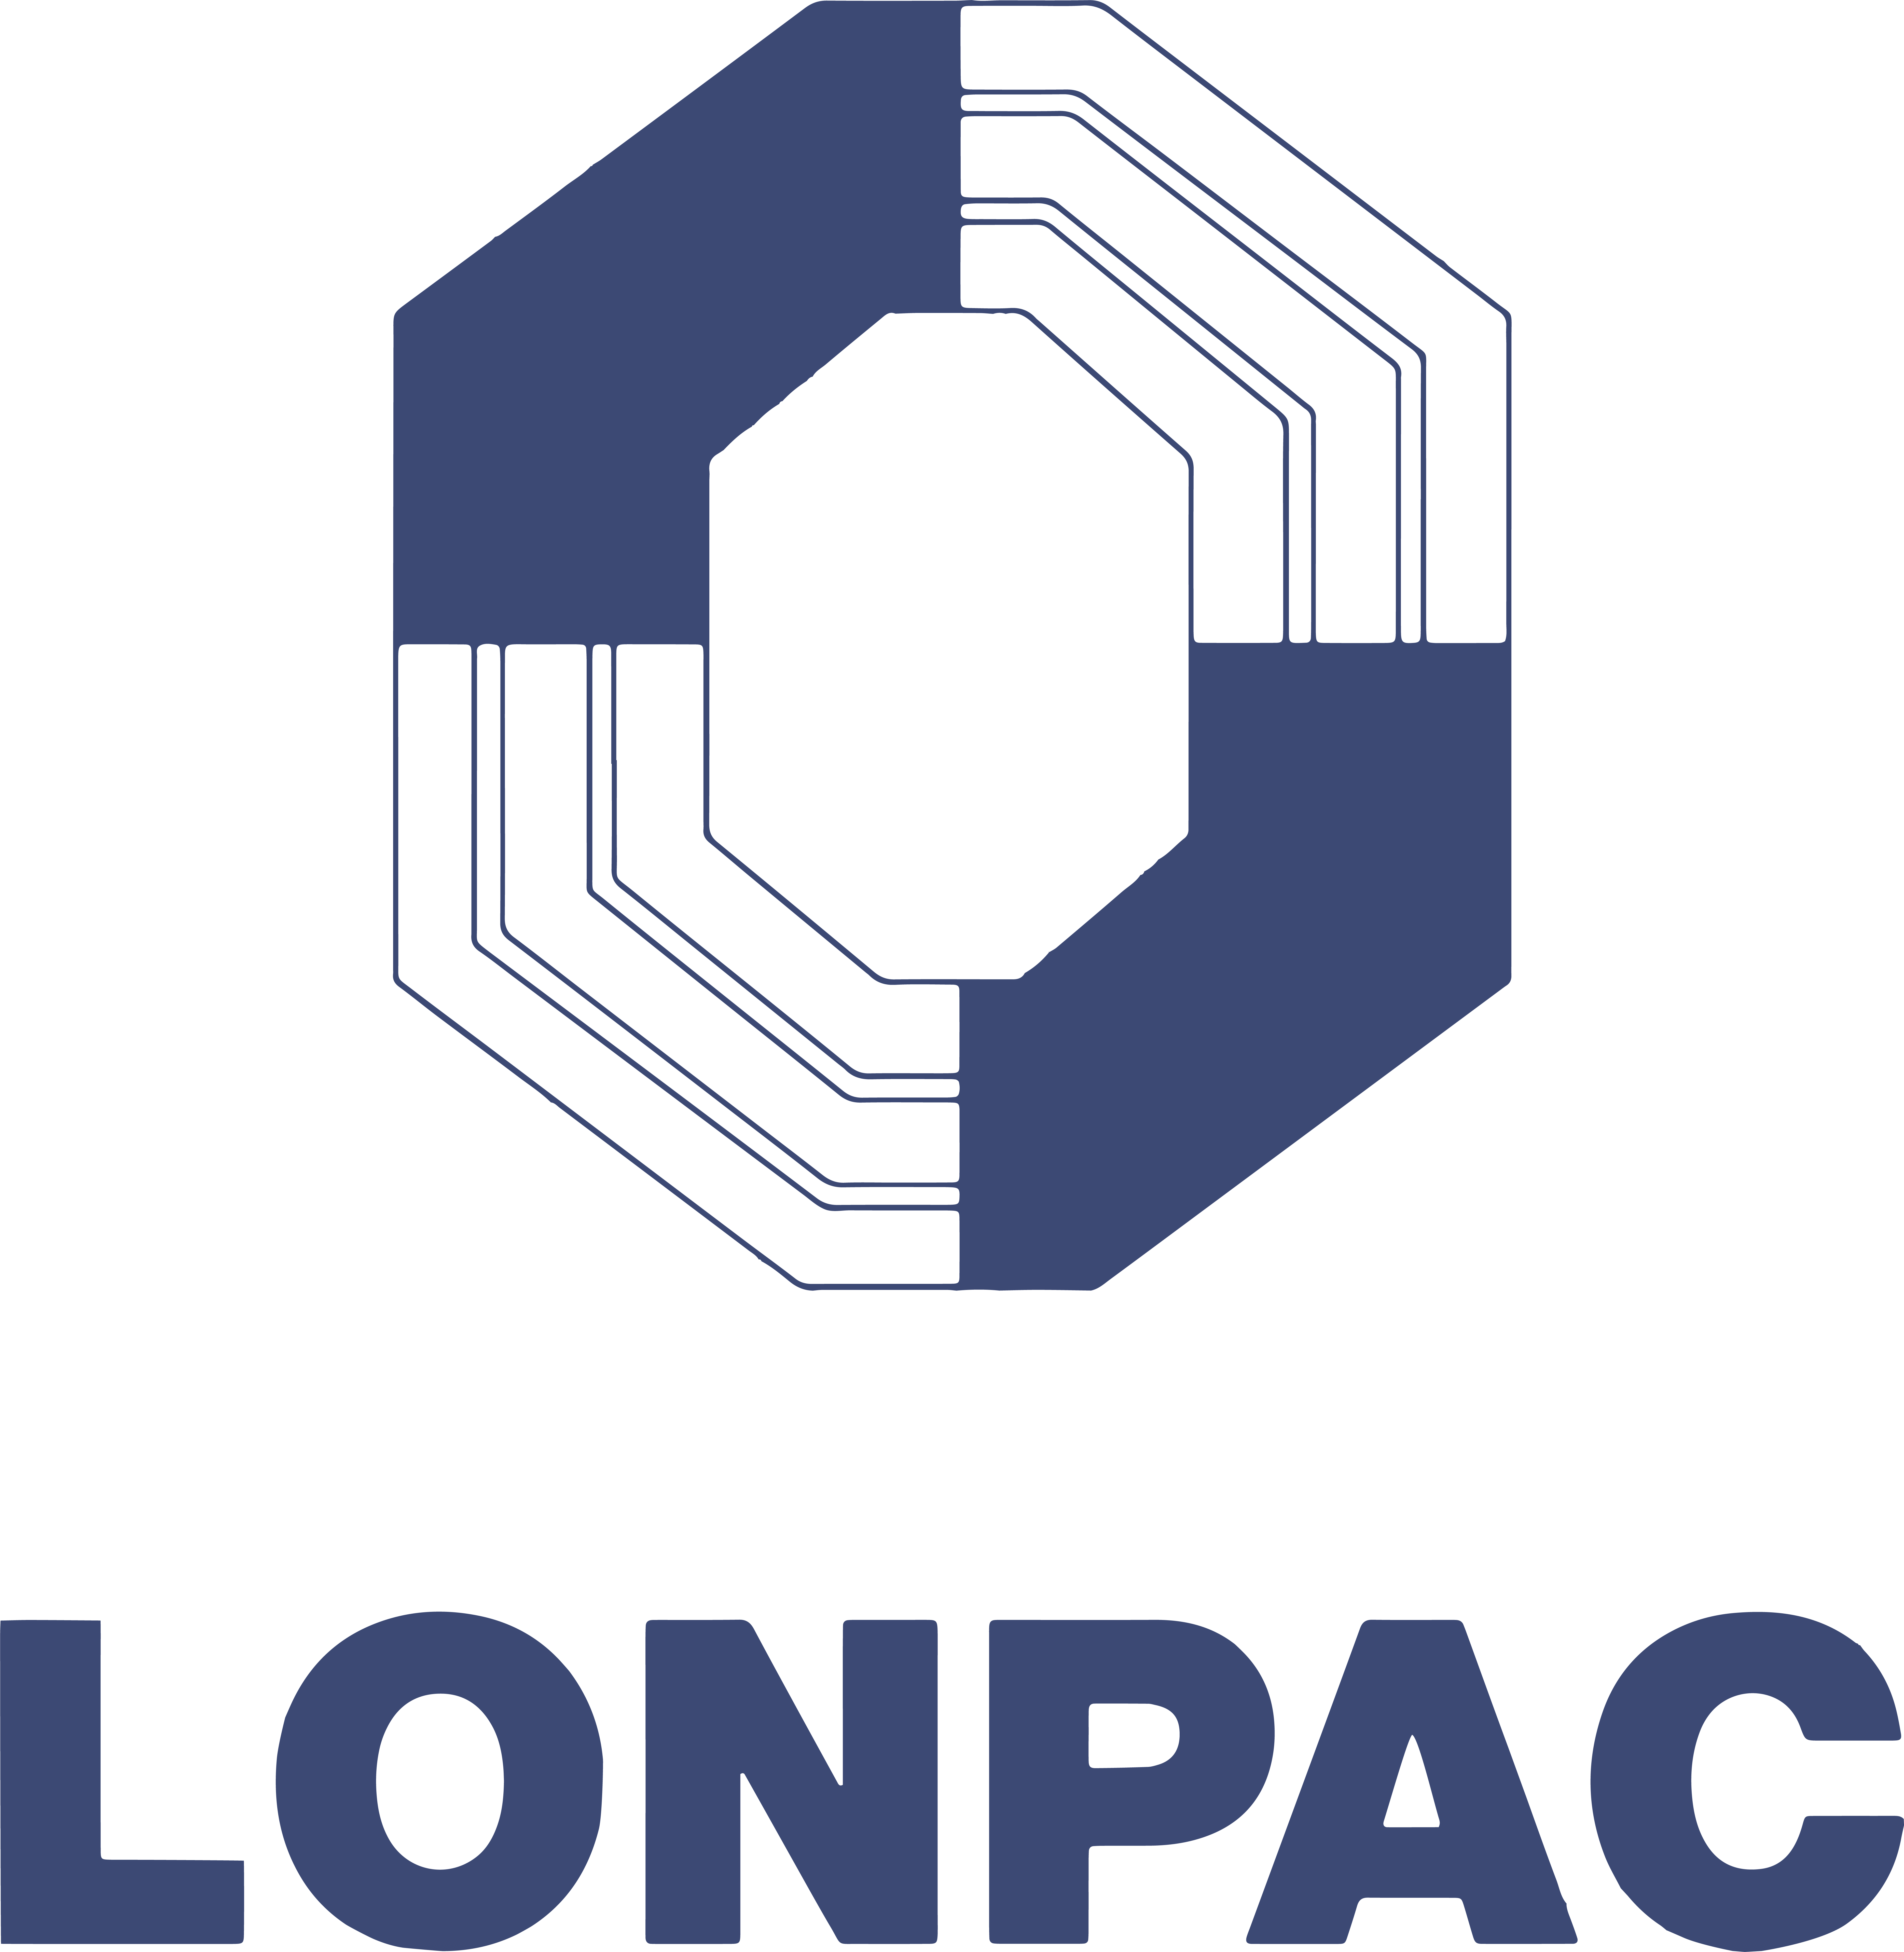 Find the Best Lonpac Insurance with the Cheapest Price